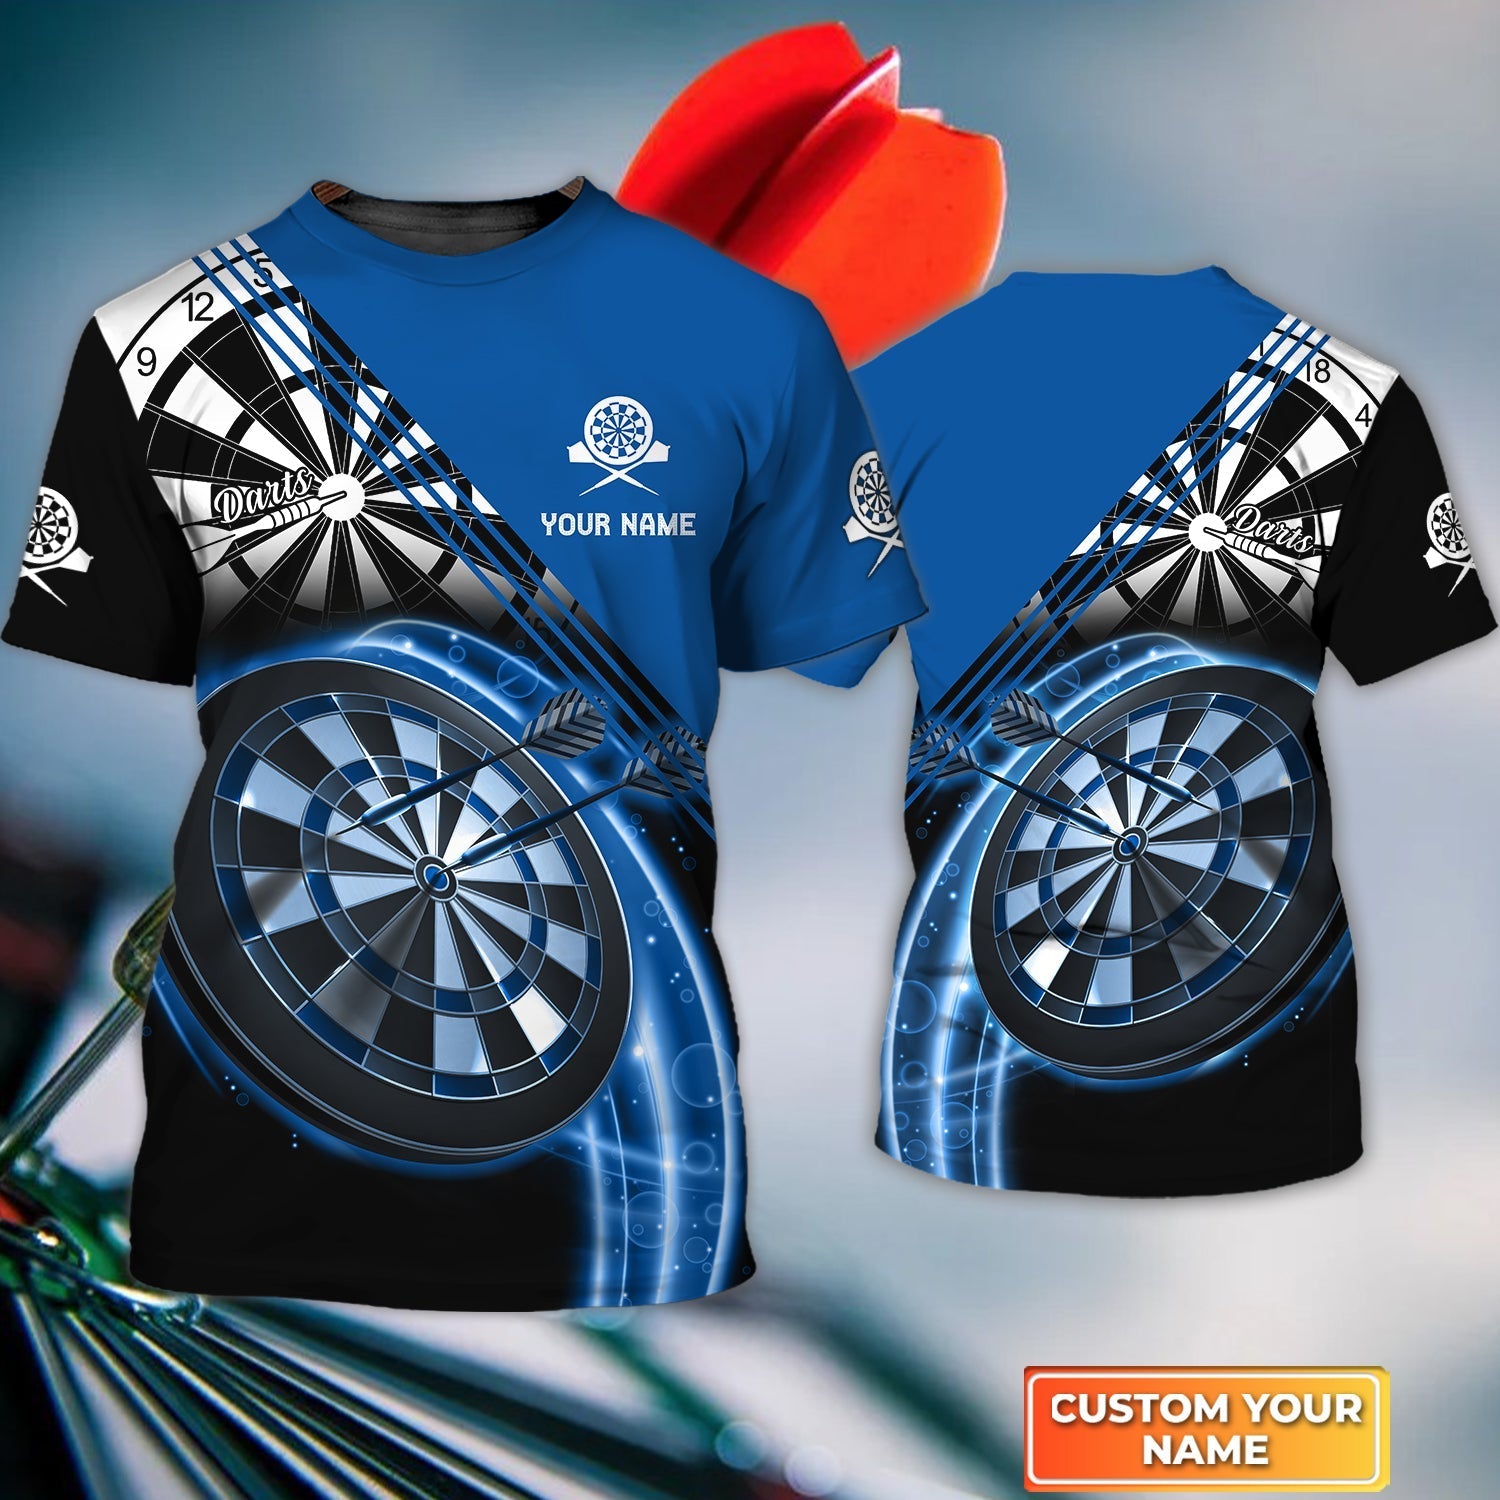 Personalized Dart Shirt Full Printing For Darts Player, Gift For Dart Lover, Dart Player Gifts – DT011